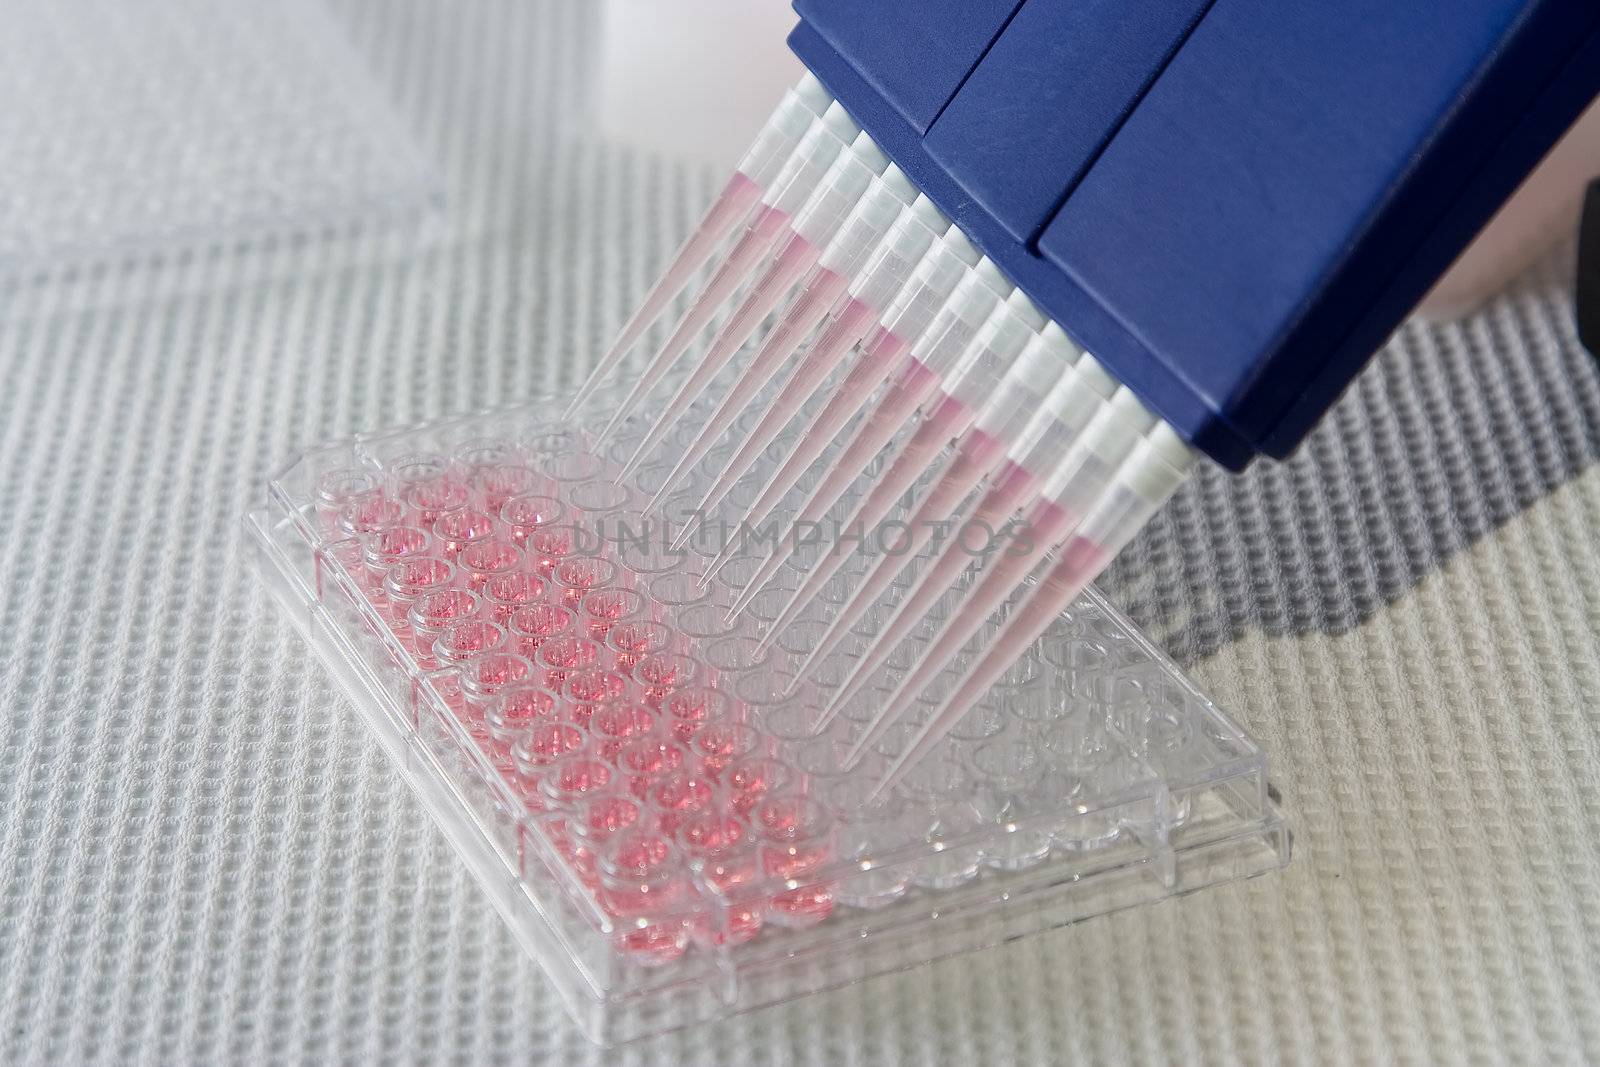 Blue multi-channel pipet used for pipetting a 96 well plate with pink solution on white